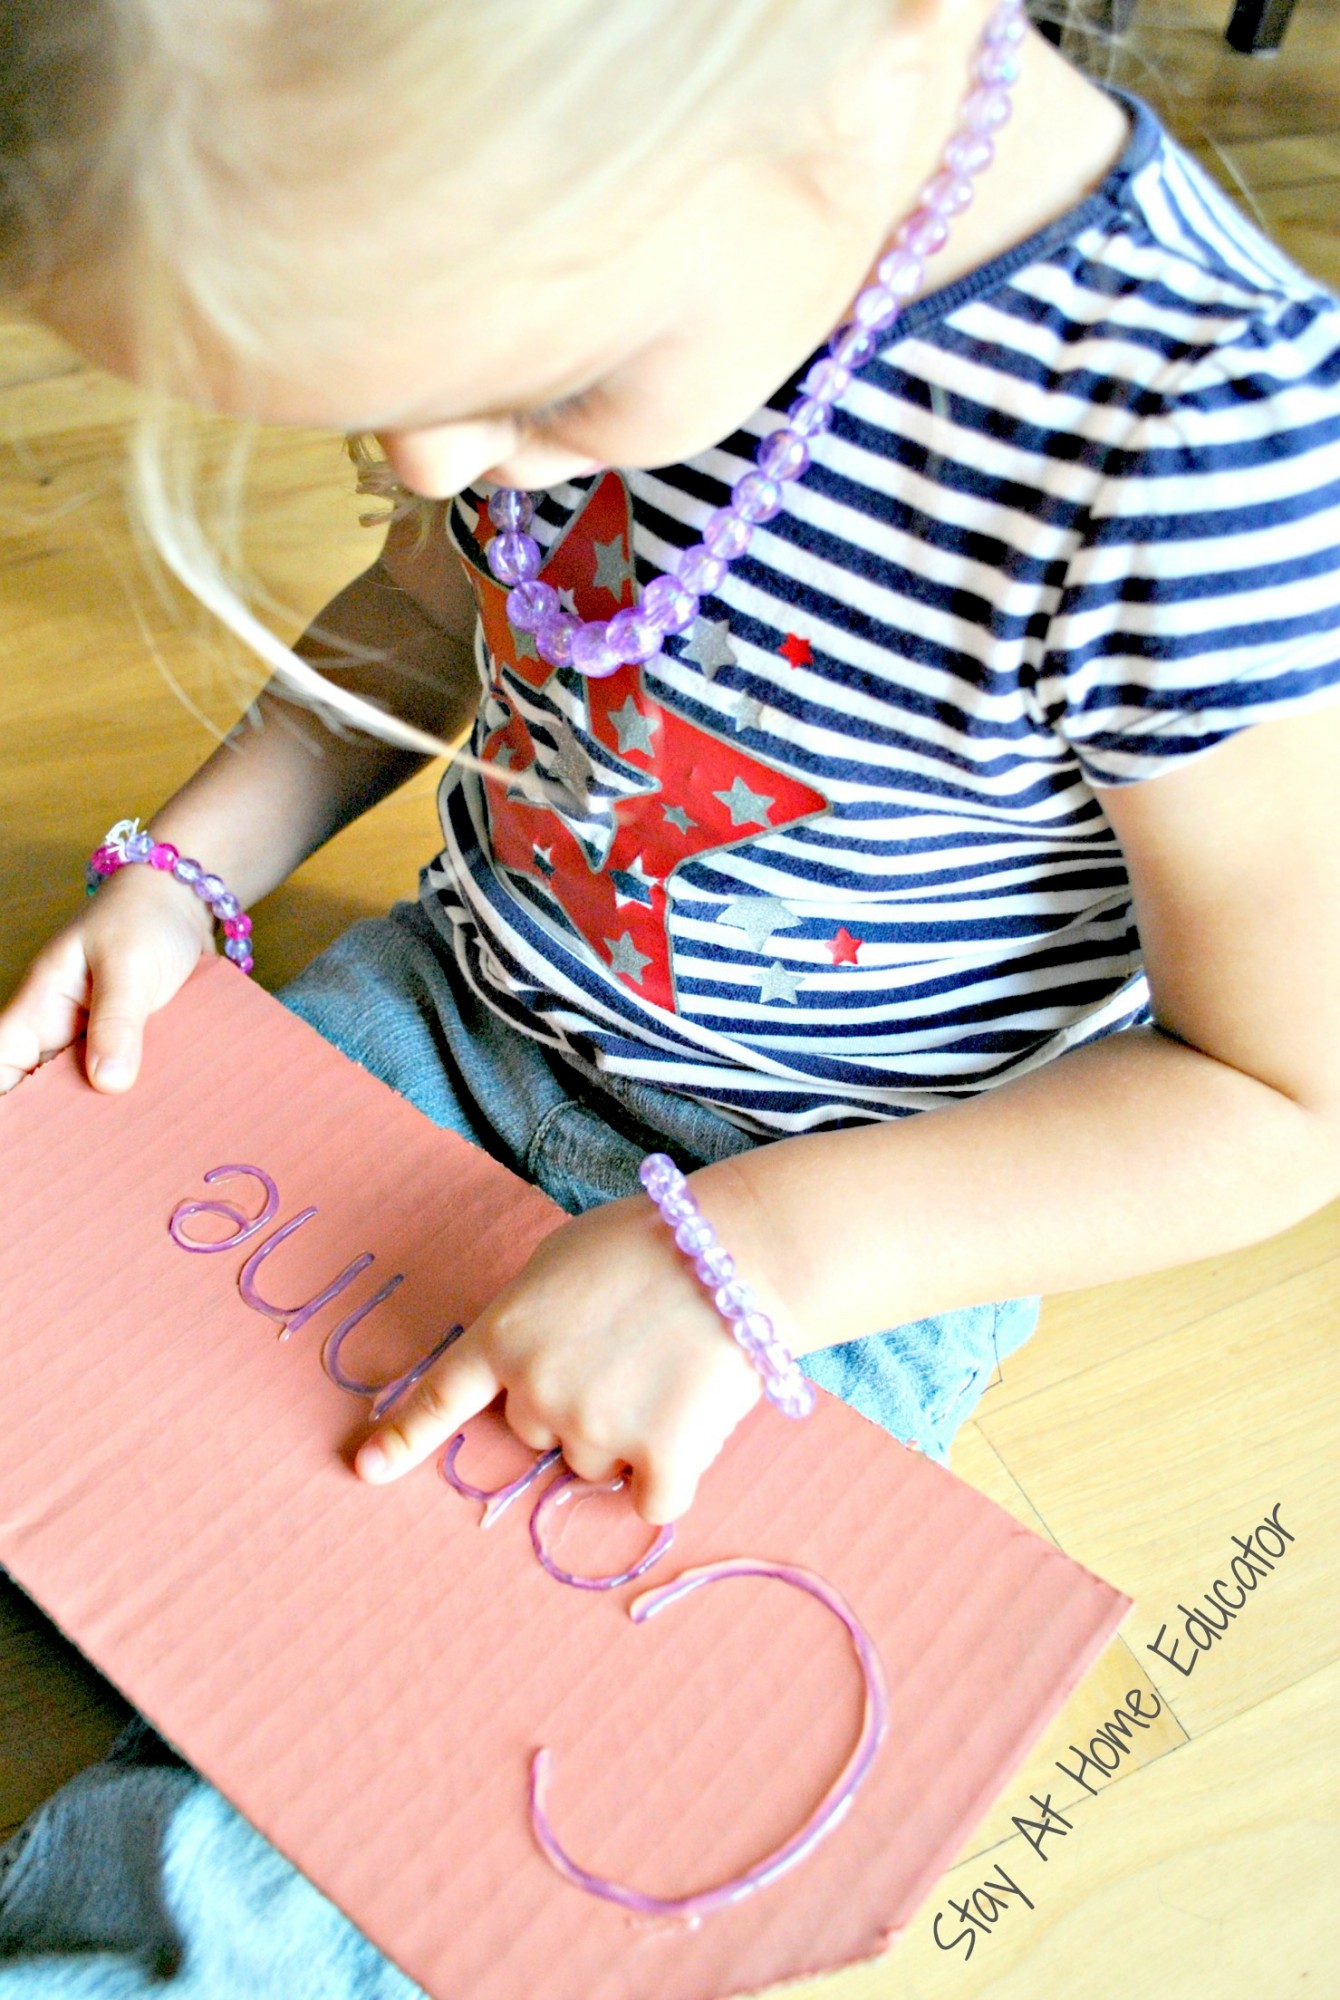 name writing activities | writing names with glue activity for preschoolers | tactile name tracing activities | how to teach preschoolers to write their names | collage of preschool name plates using hot glue for tracing the name with finger